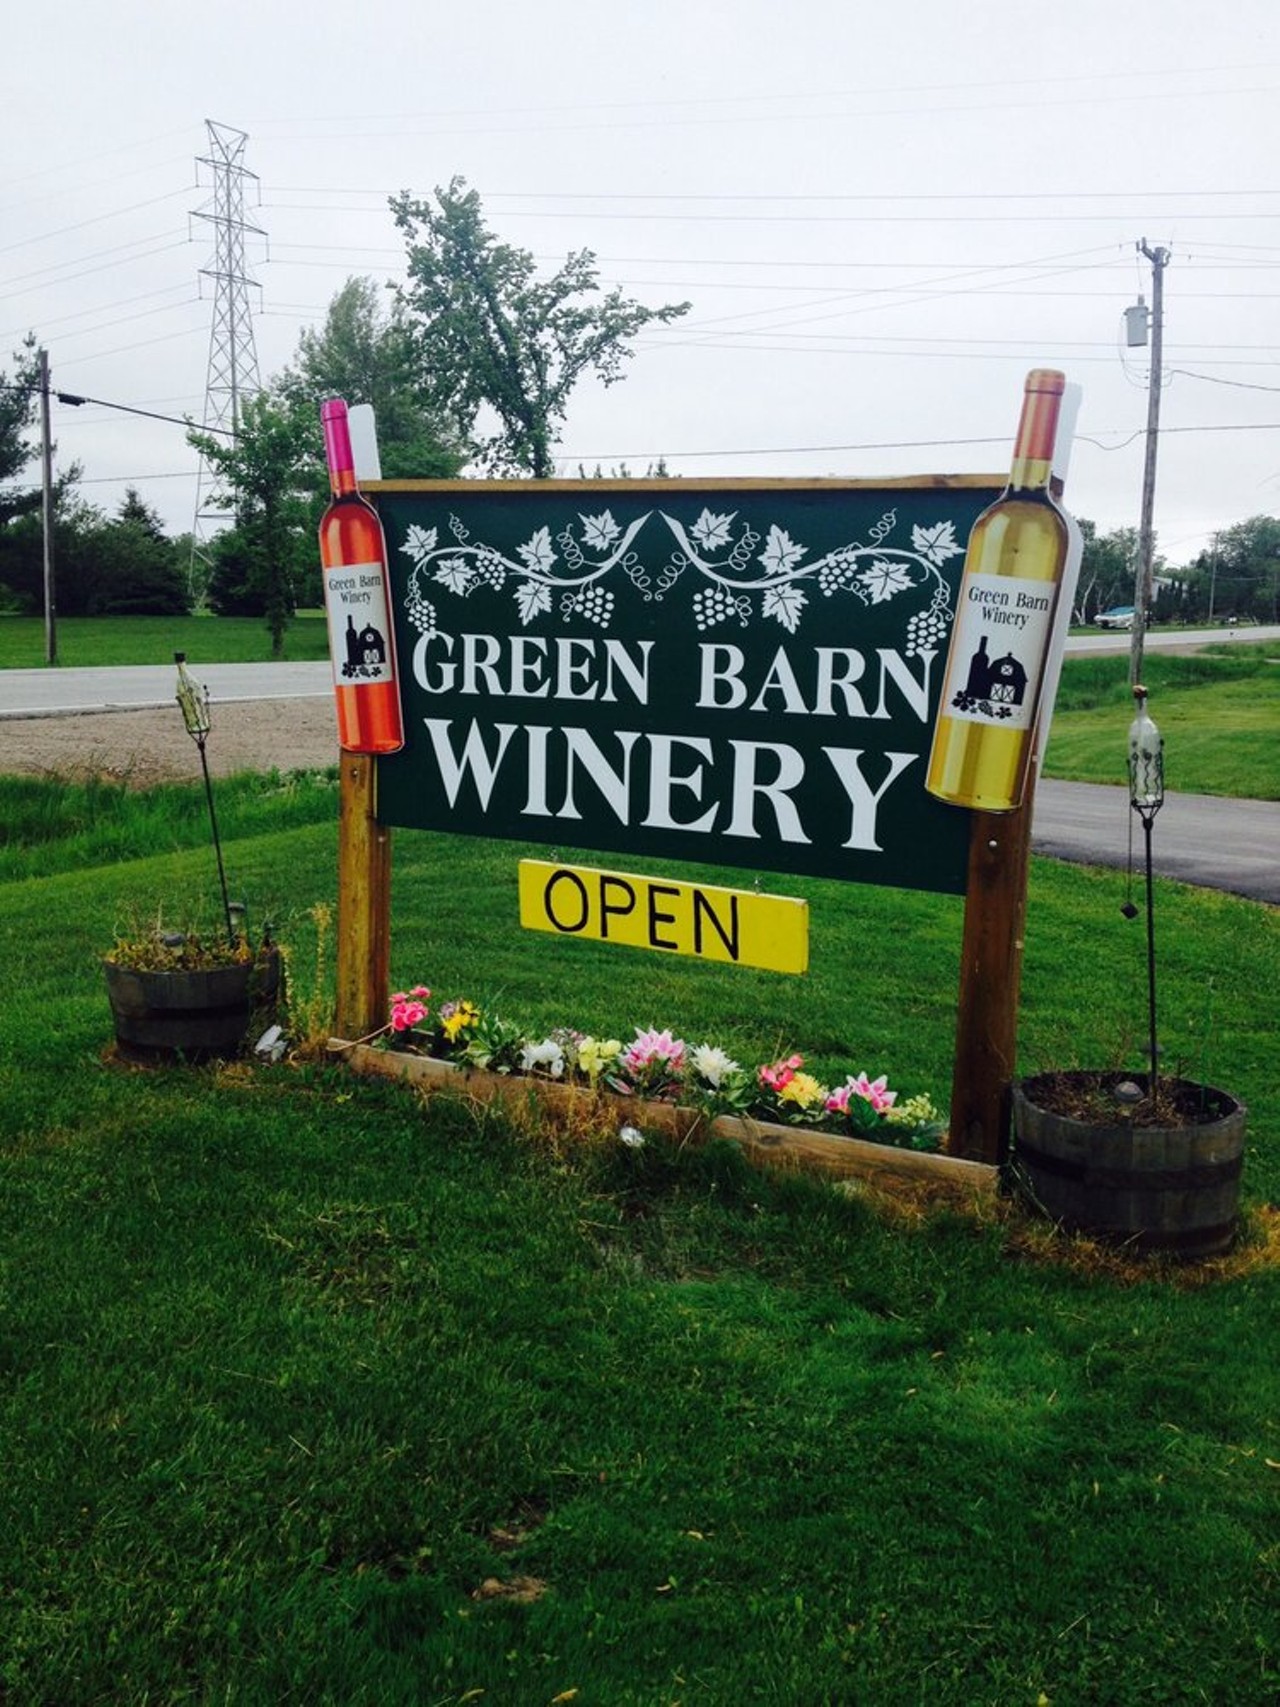 Green Barn Winery, Smiths Creek
A hidden gem just minutes from I-94 near Port Huron, this winery offers a full line of wines and small town charm  in a  tasting room located in - you guessed it! - a big green barn. Part of the Thumbs Up Wine Trail. (Photo Credit: Mike R. via Yelp)